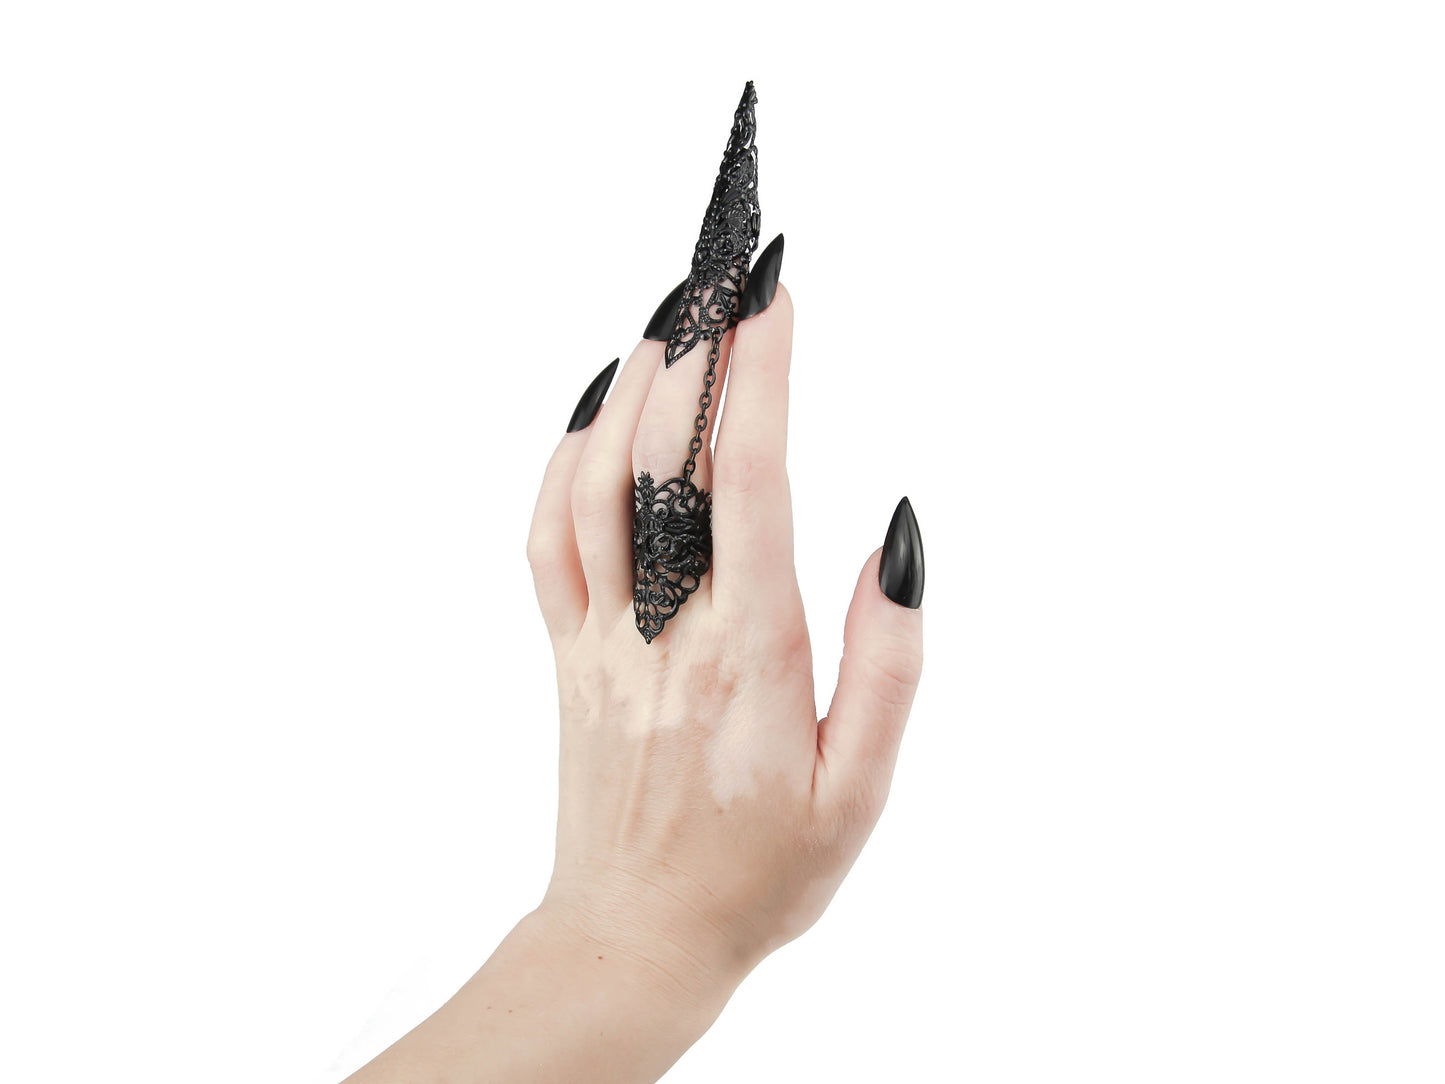 A hand is adorned with a Myril Jewels black full finger claw ring, crafted with exquisite filigree detailing. This luxurious neo-goth piece is a quintessential expression of dark-avantgarde jewelry, perfect for gothic, alternative, and drag queen aesthetics. The ring, suitable for Halloween, punk events, and everyday wear, also complements a whimsigoth or witchcore style and adds an edgy touch to rave party and festival outfits.